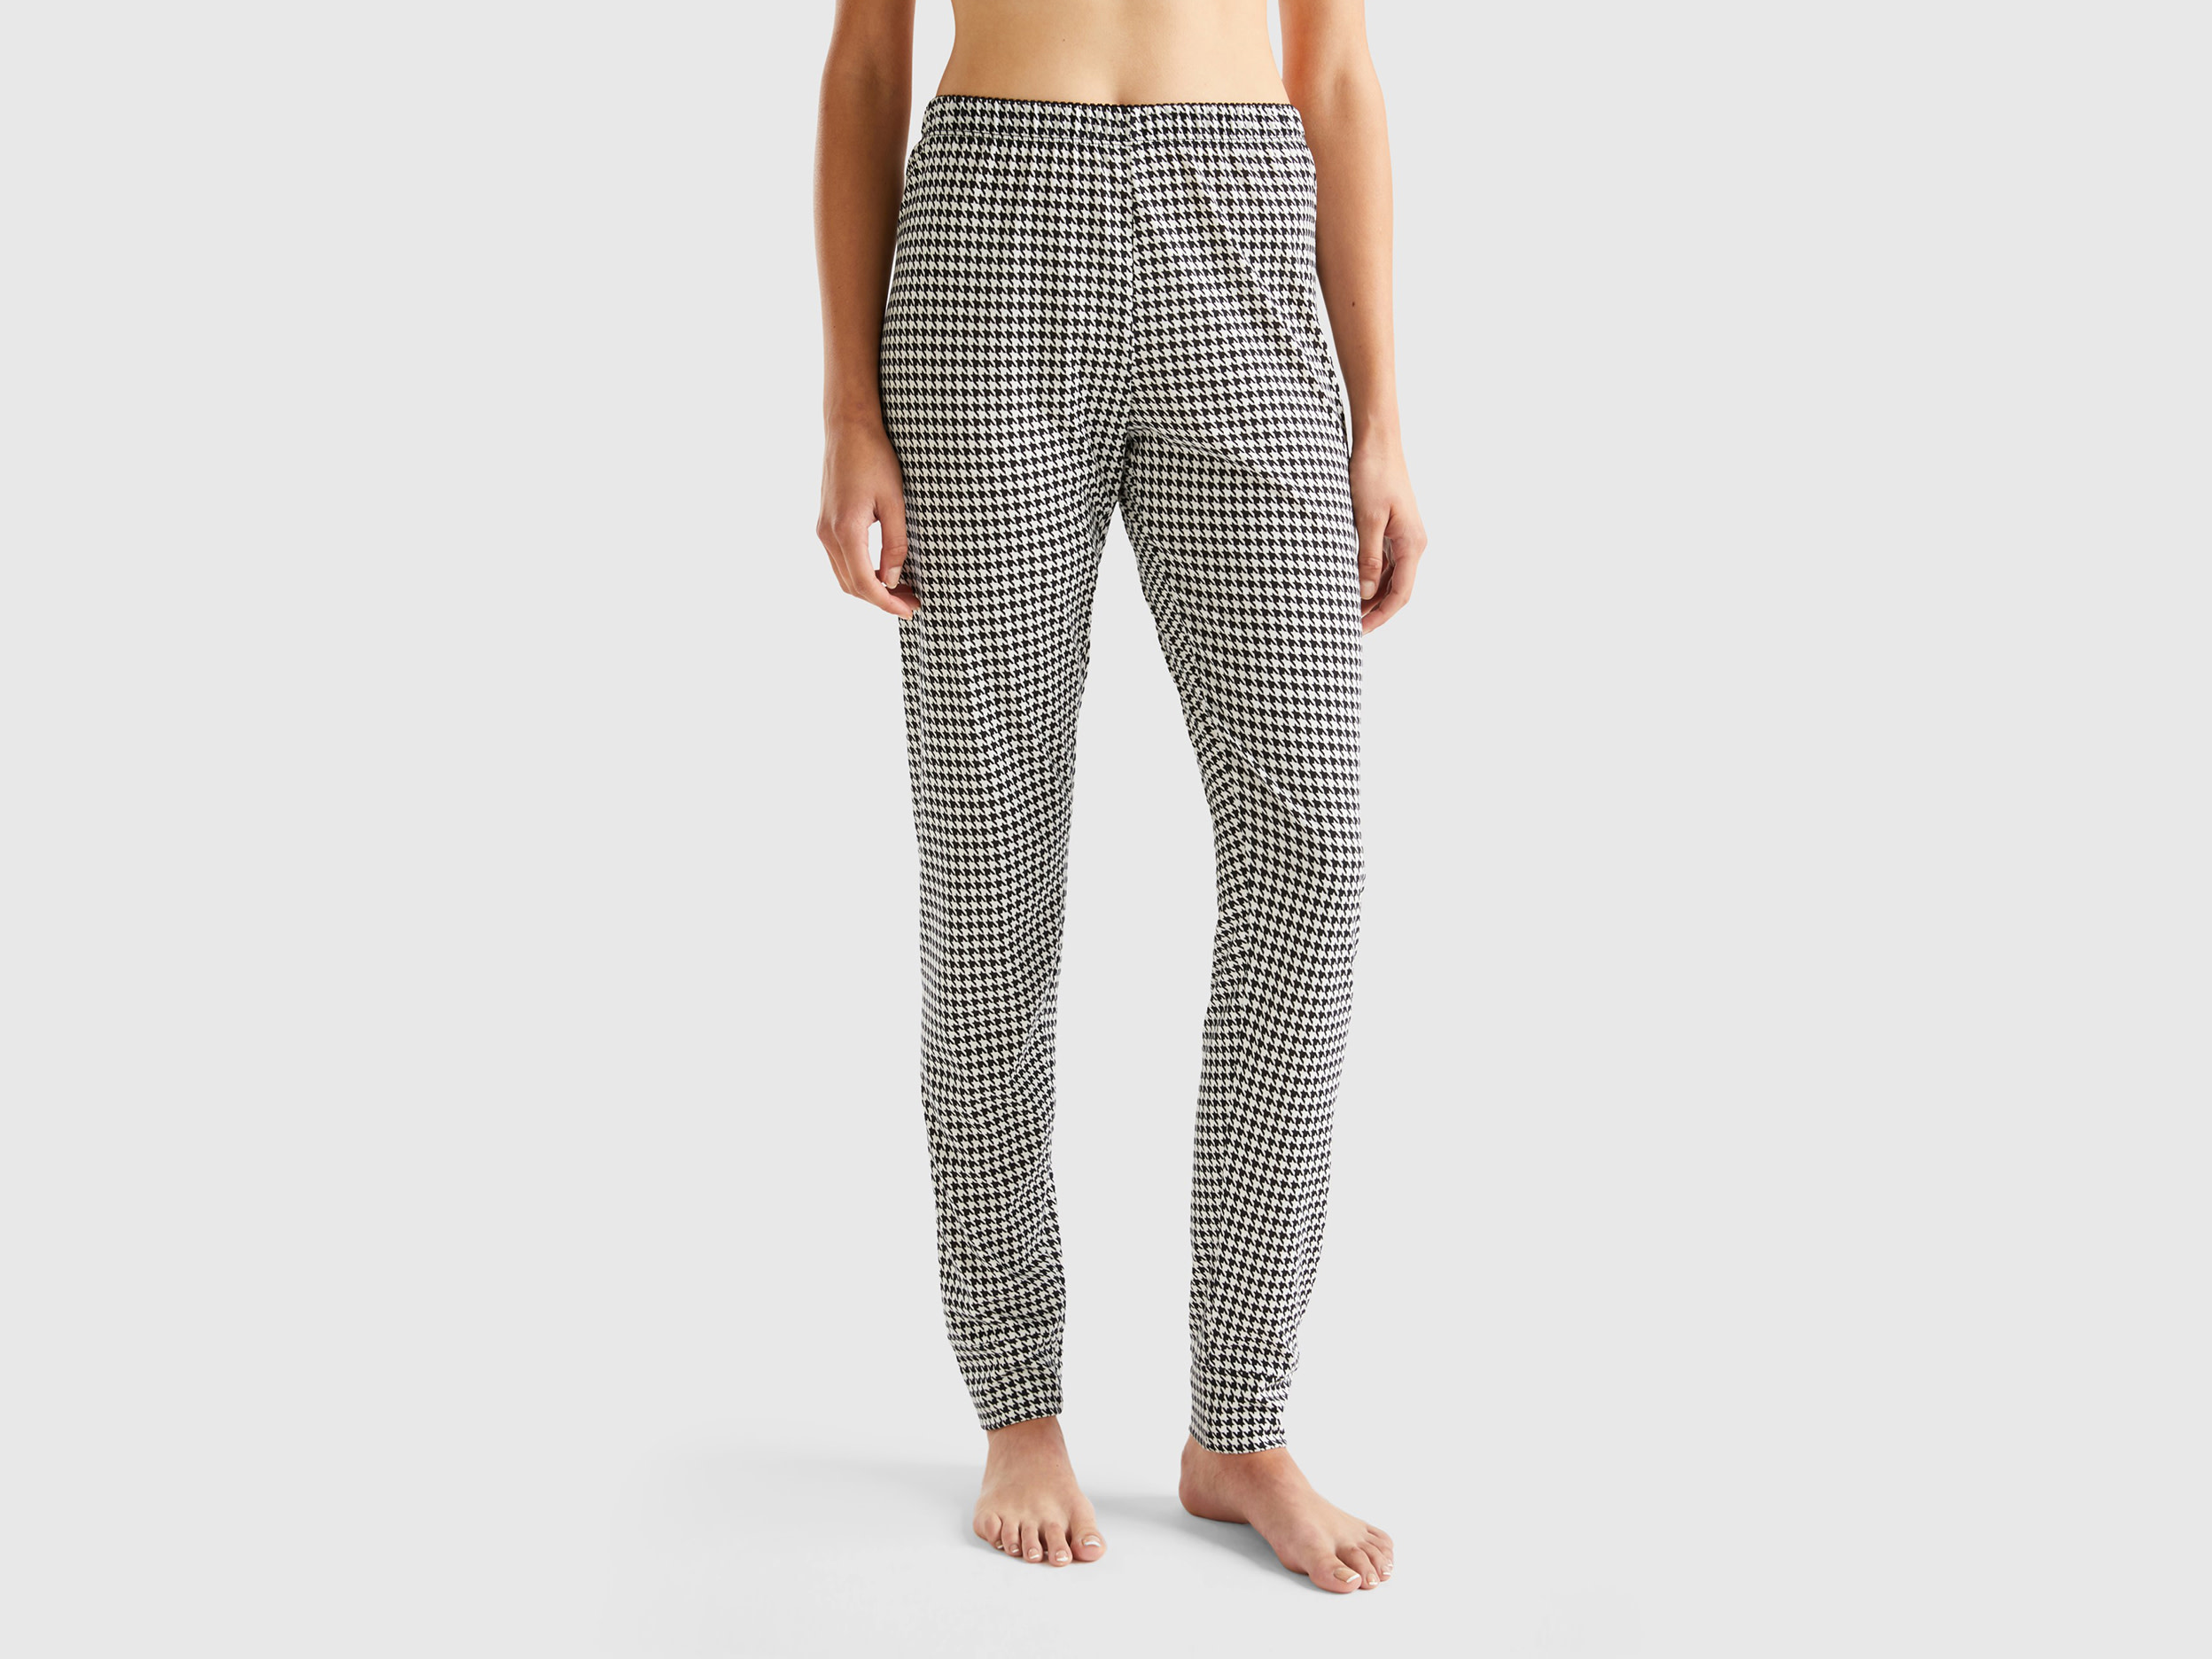 Benetton, Houndstooth Trousers, size L, Multi-color, Women